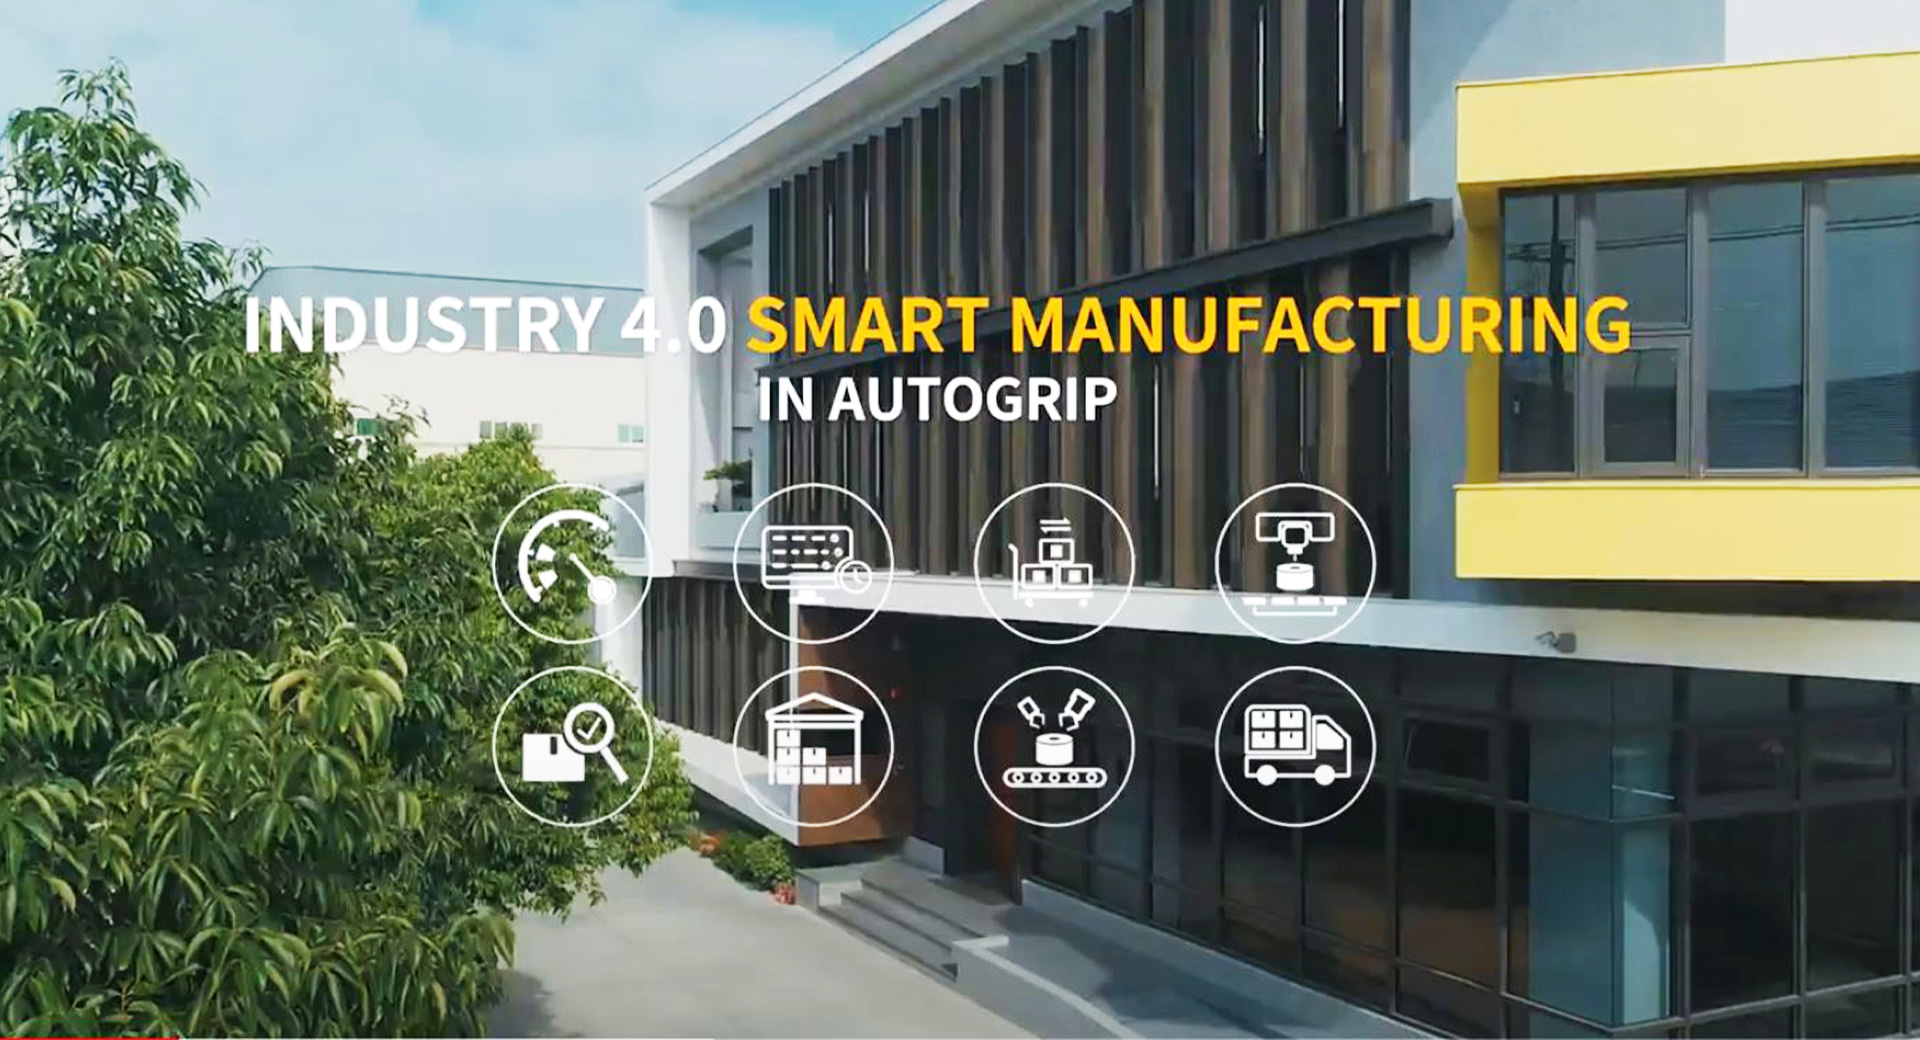 Video|INDUSTRY 4.0 SMART MANUFACTURING IN AUTO